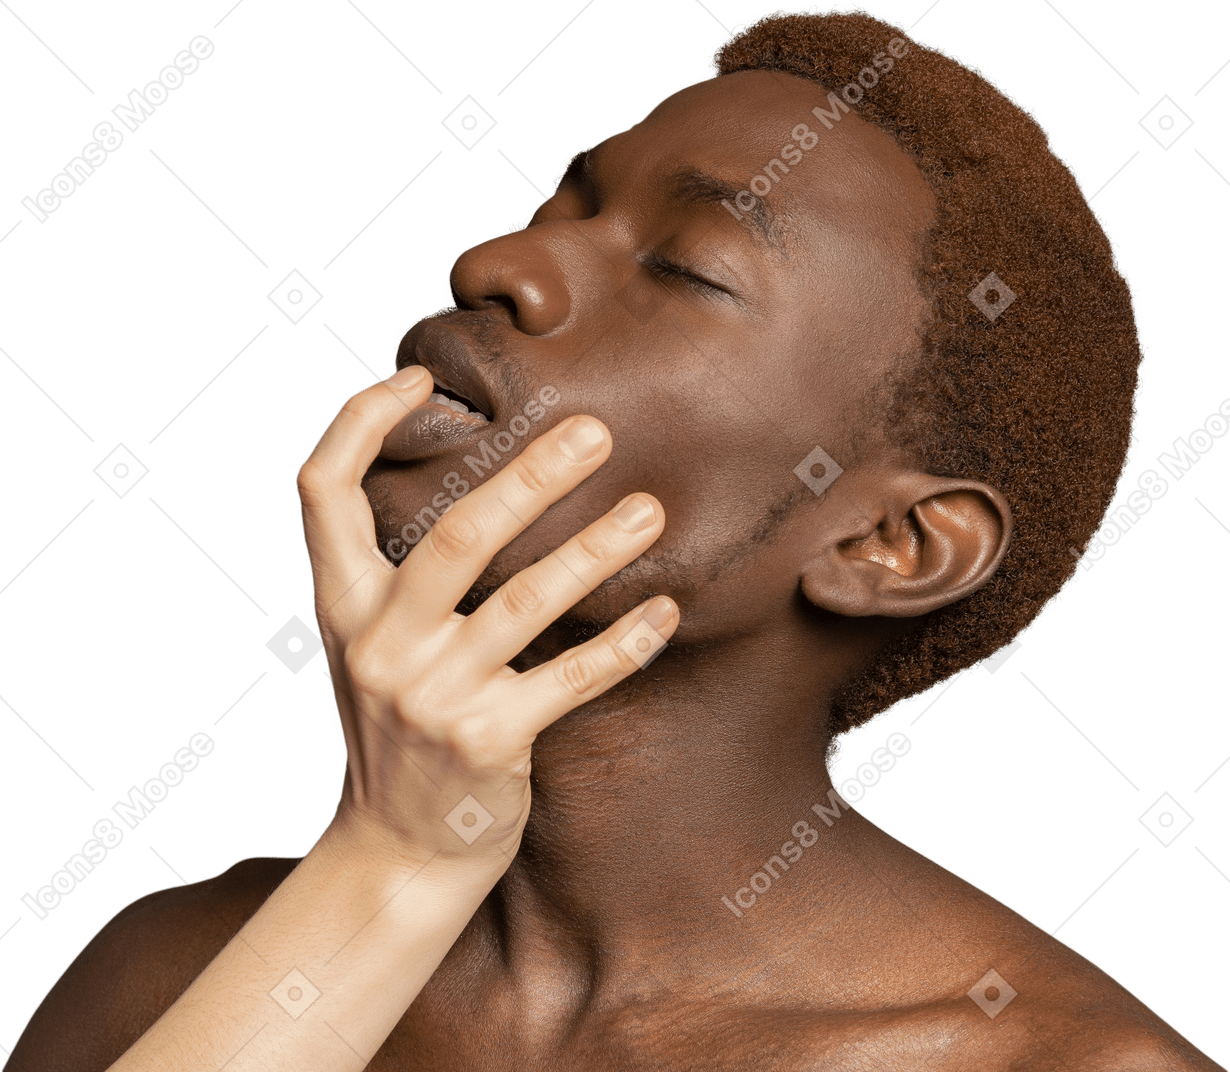 White hand touching the face of black young man